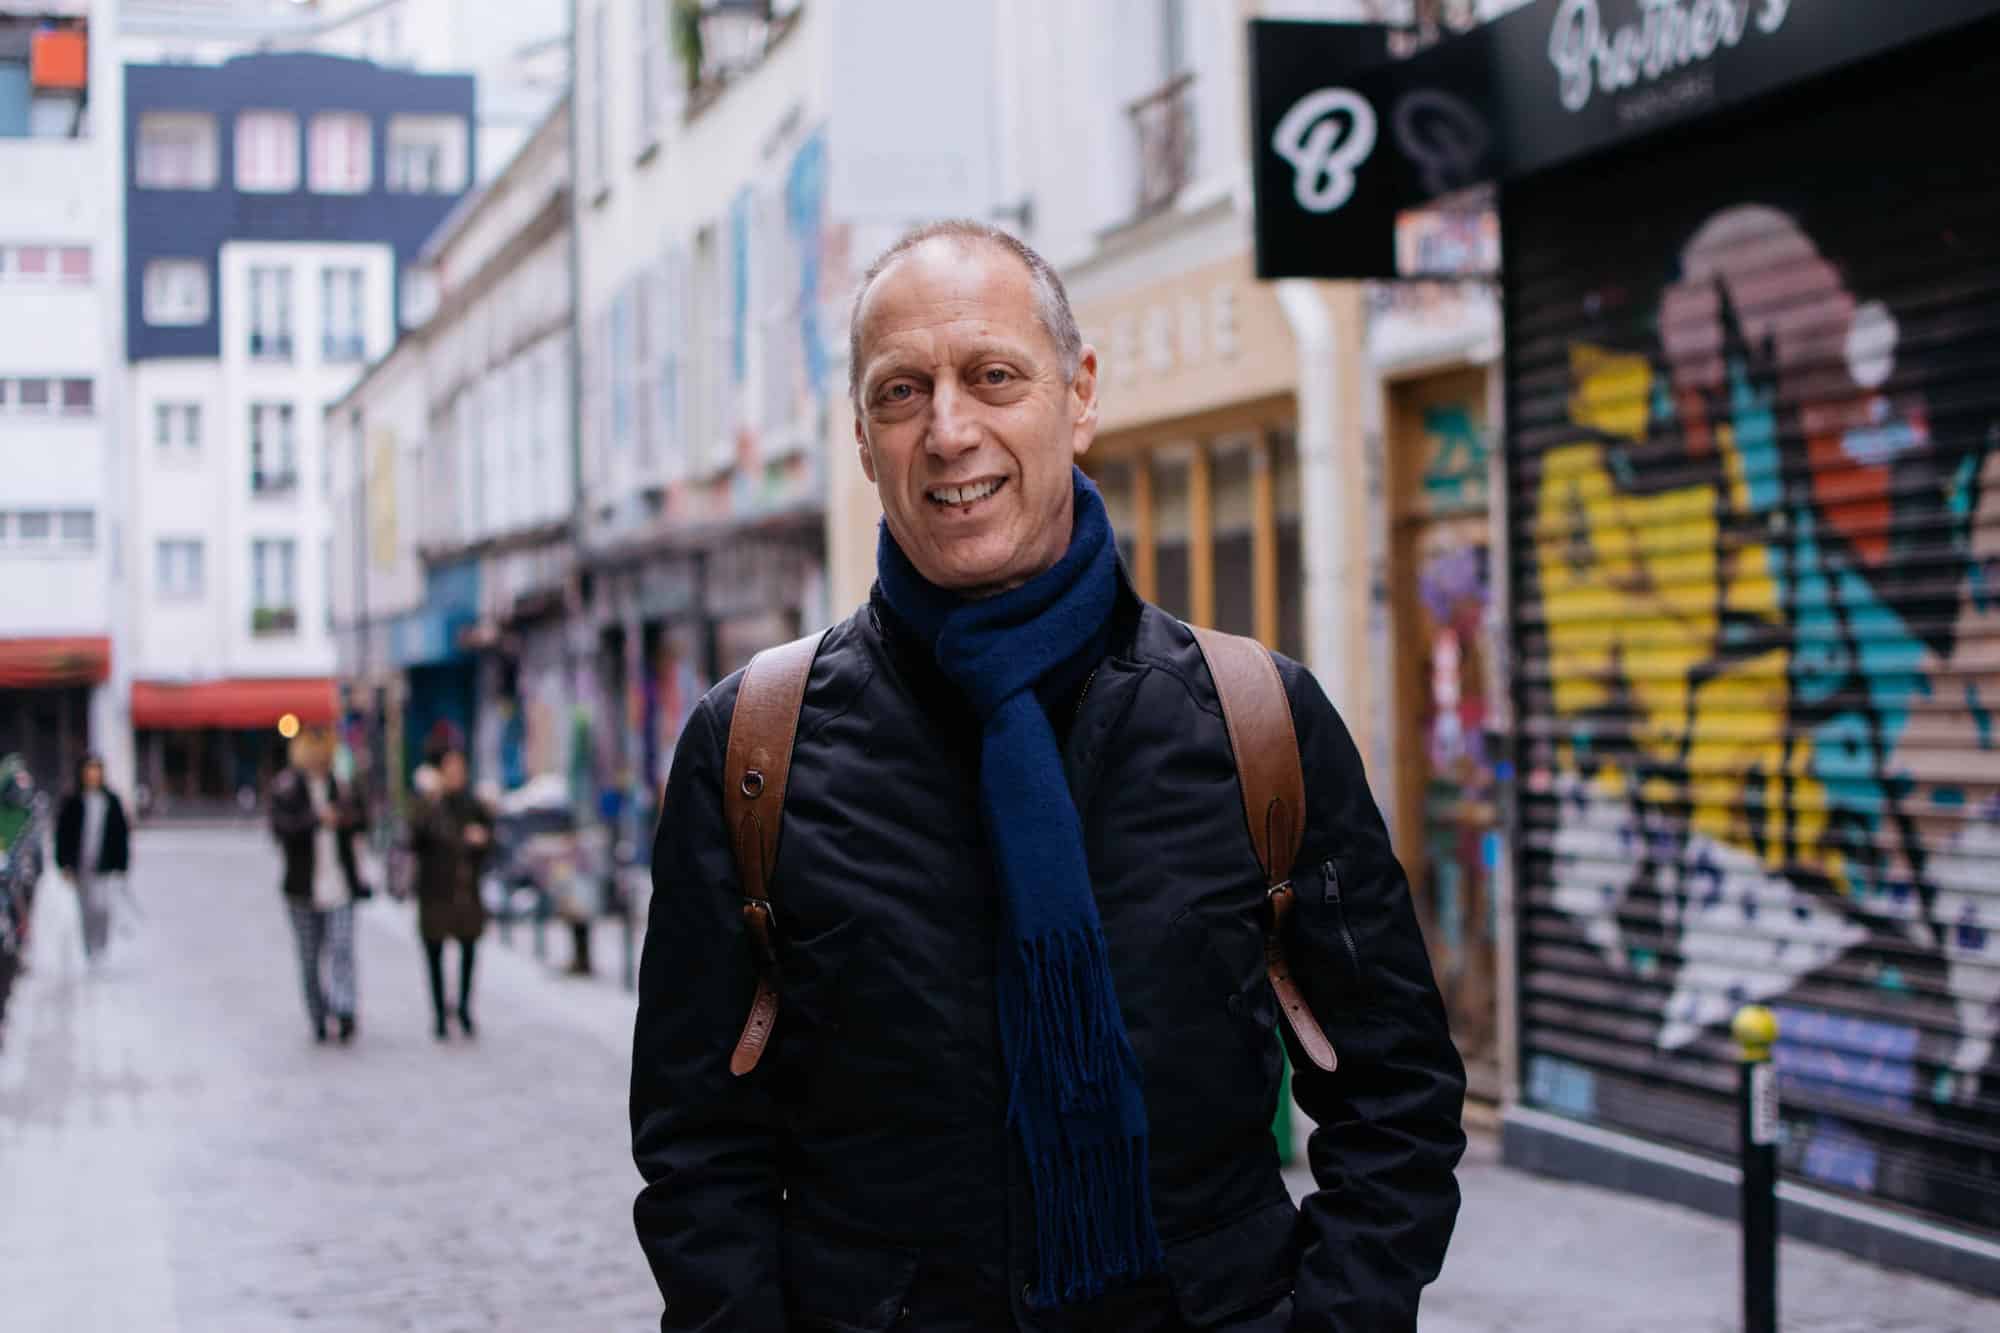 A portrait of David Lebovitz standing with a smile in the middle of a street in Paris' diverse Bellville neighborhood.